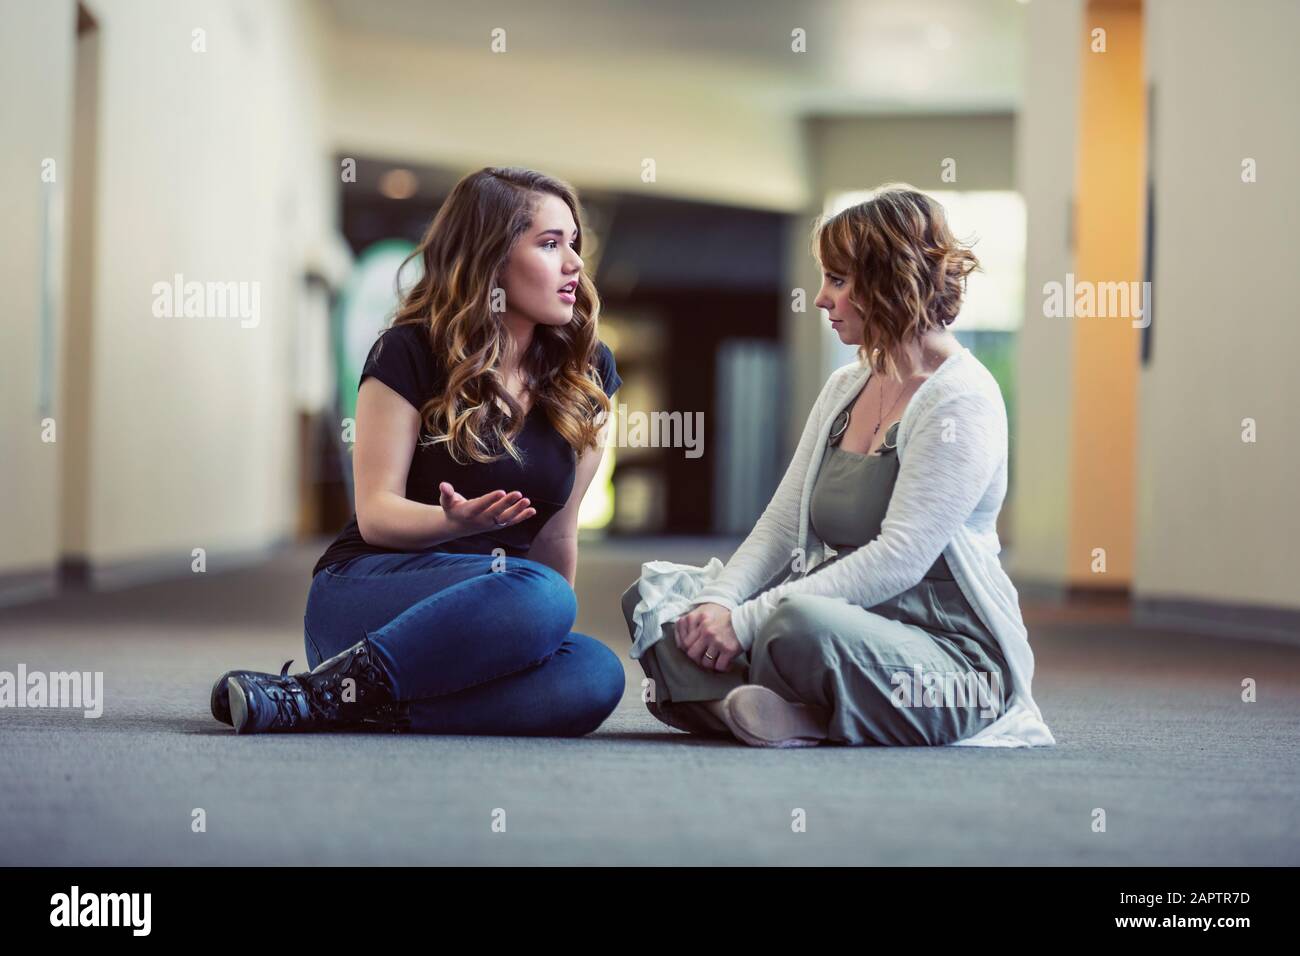 A young woman and her youth leader discussing their faith in a hallway of a church: Edmonton, Alberta, Canada Stock Photo